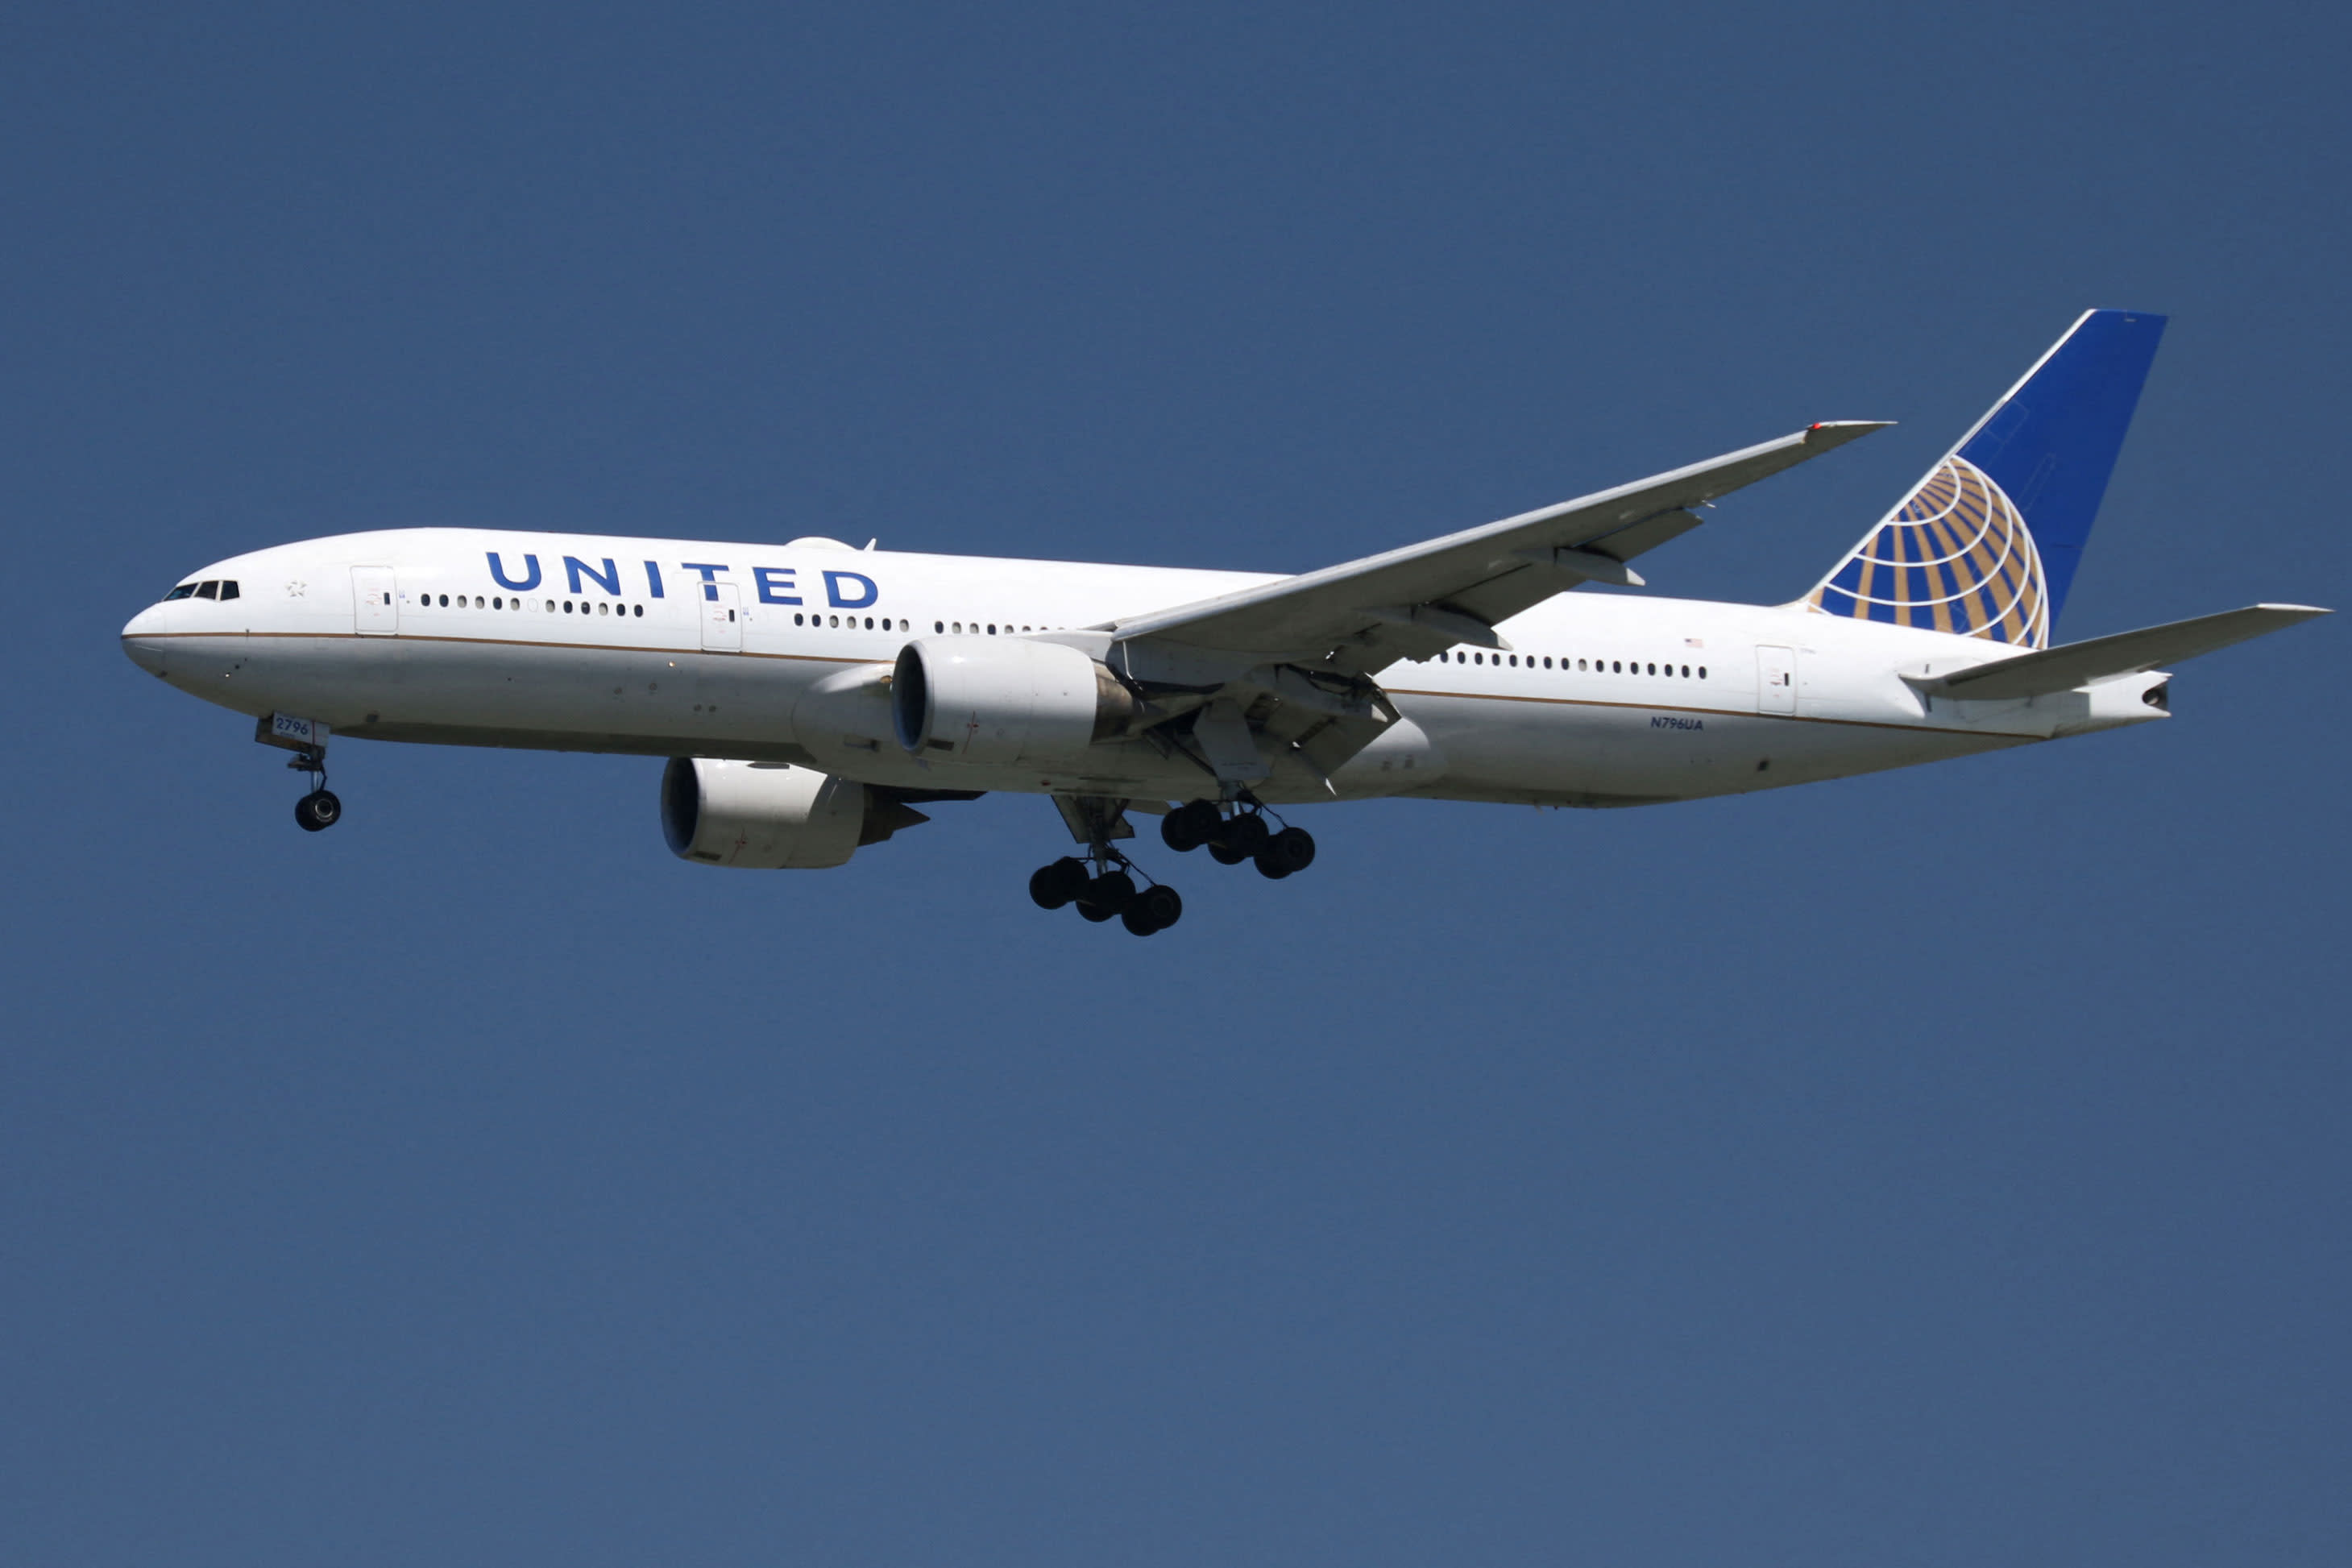 Morgan Stanley upgrades United Airlines, says 2023 could be 'Goldilocks' year for airline